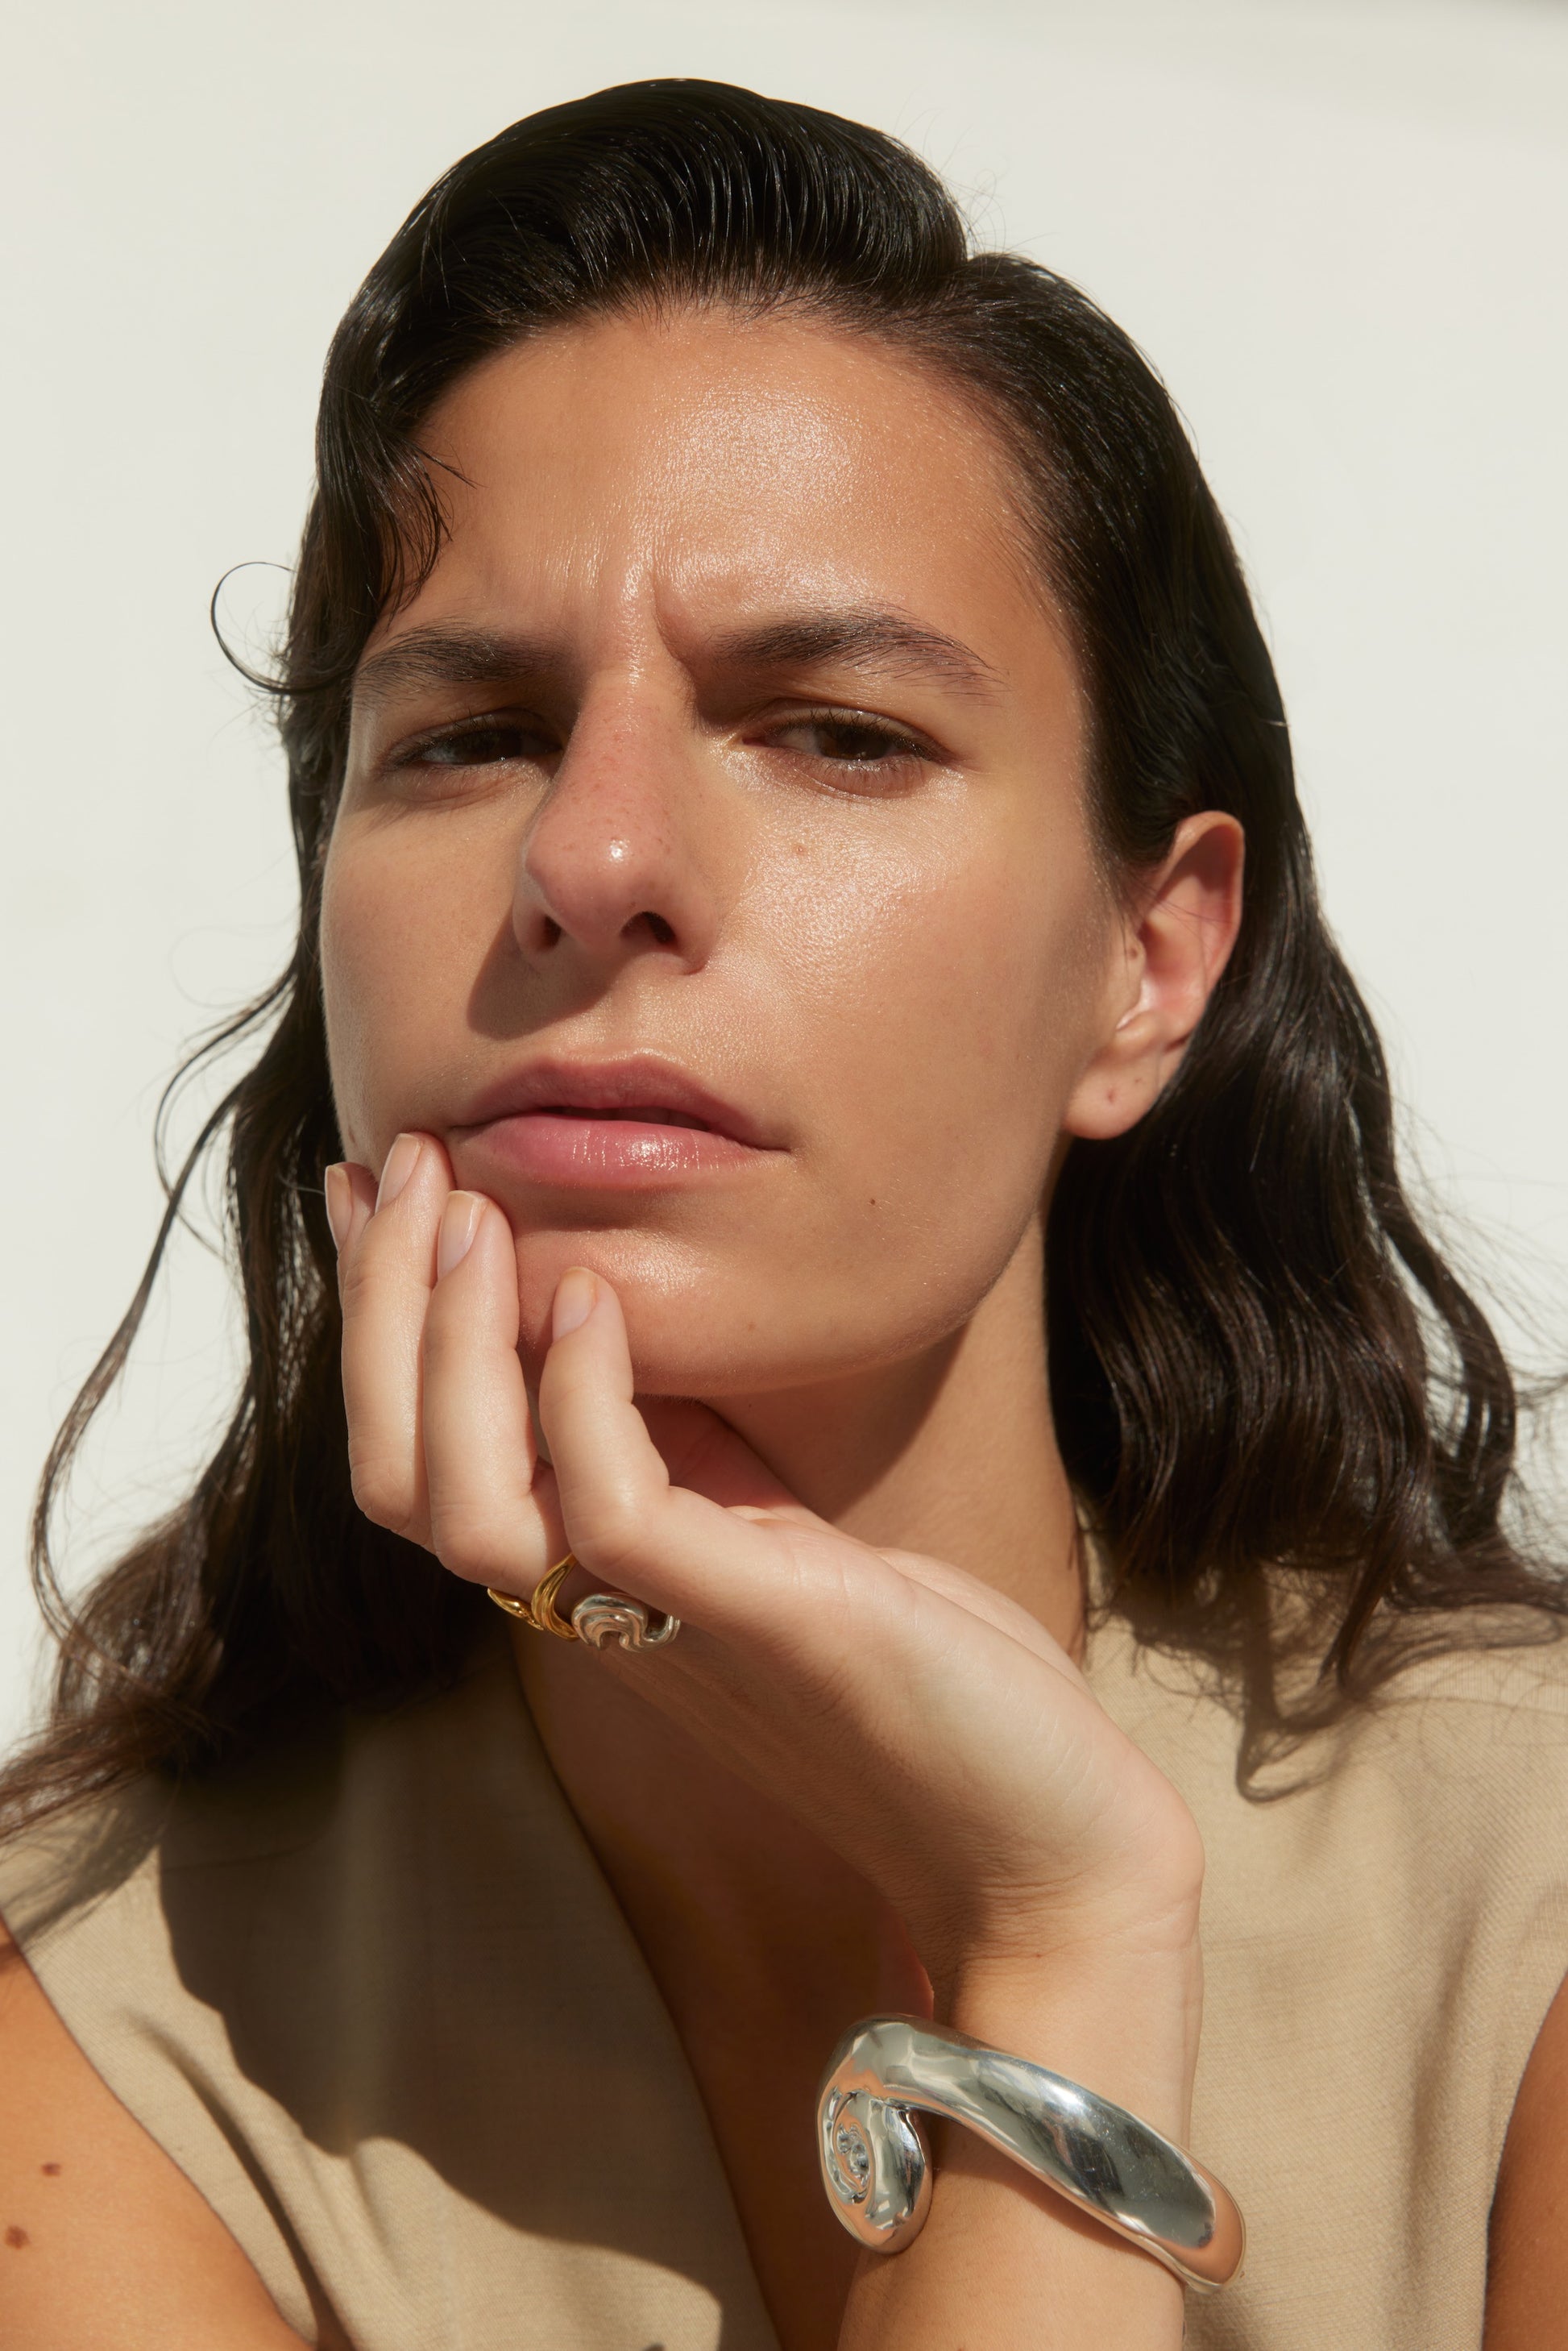 Model wearing rings and a large, sculptural silver bracelet